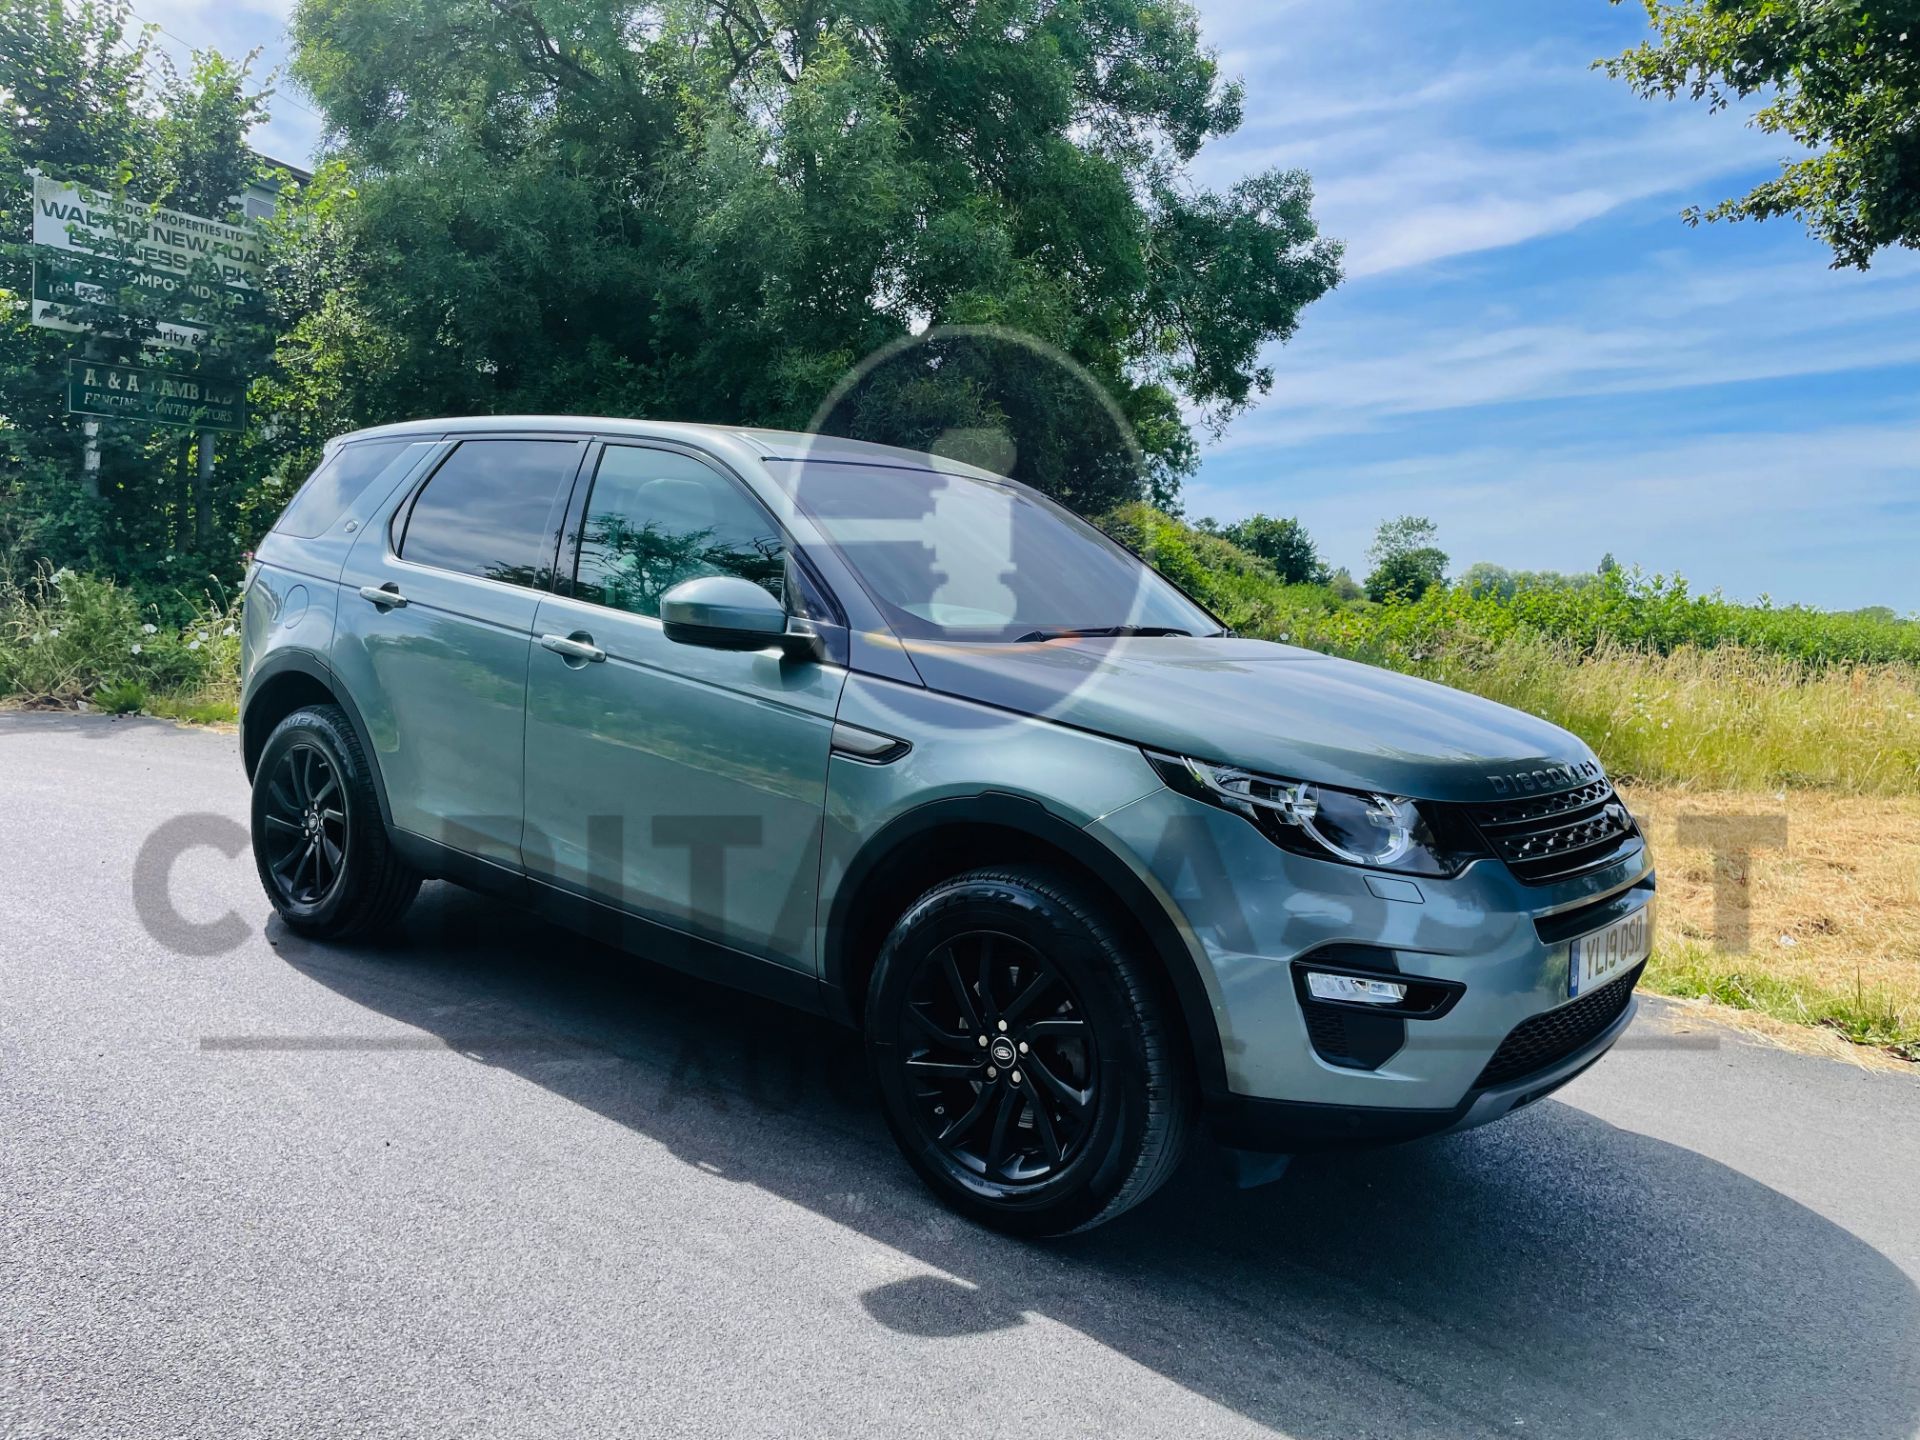 (On Sale) LAND ROVER DISCOVERY SPORT *SE TECH* SUV (2019 - EURO 6) 2.0 ED4 - STOP/START *HUGE SPEC* - Image 3 of 55